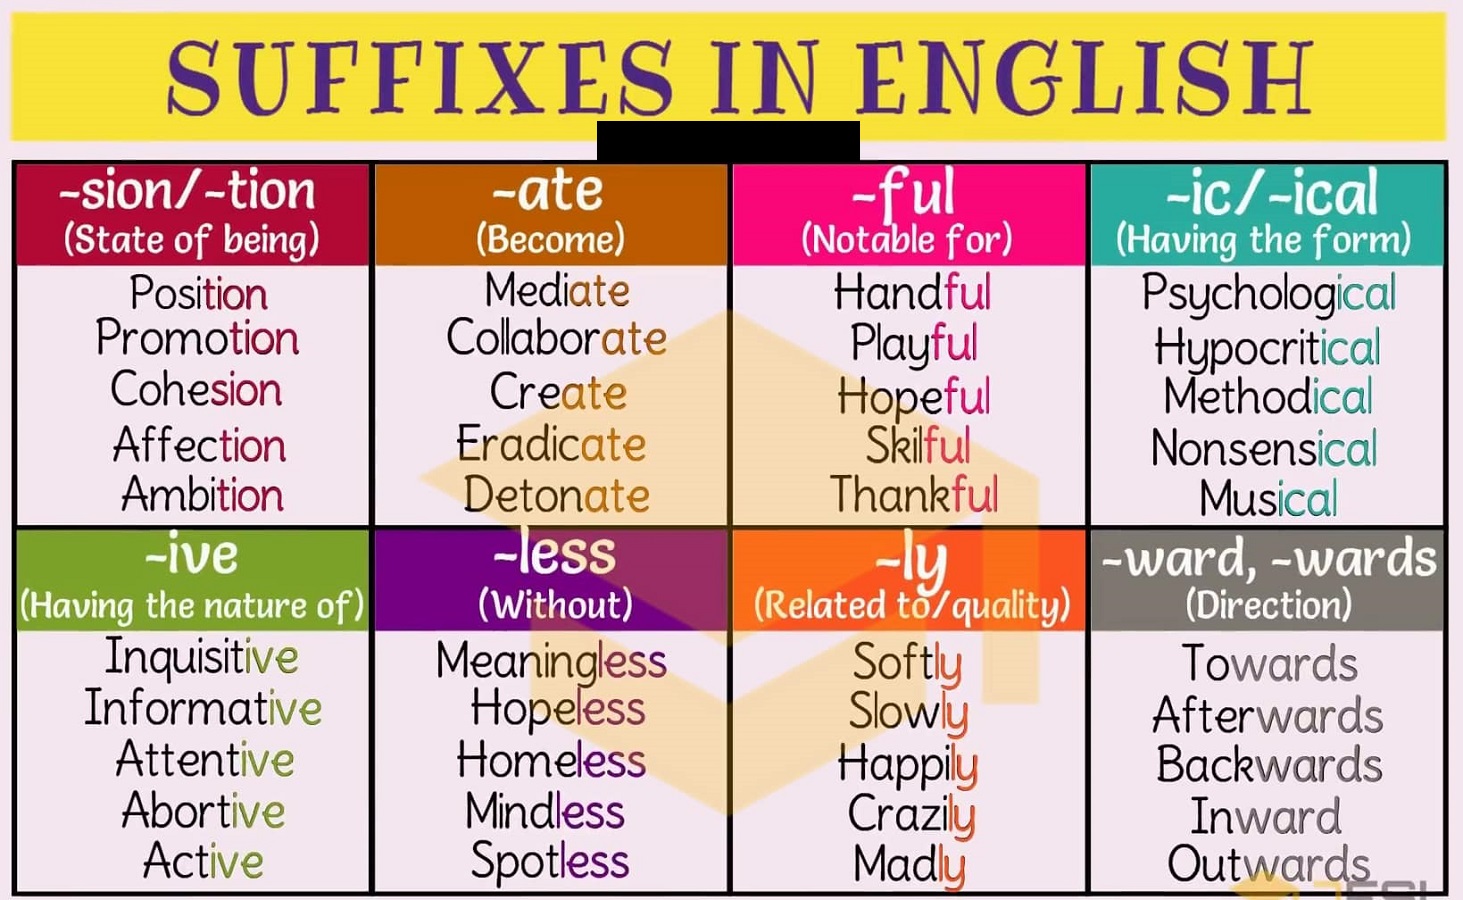 english-suffixes-english-vocabulary-words-english-learning-news-ielts-exams-toefl-pte